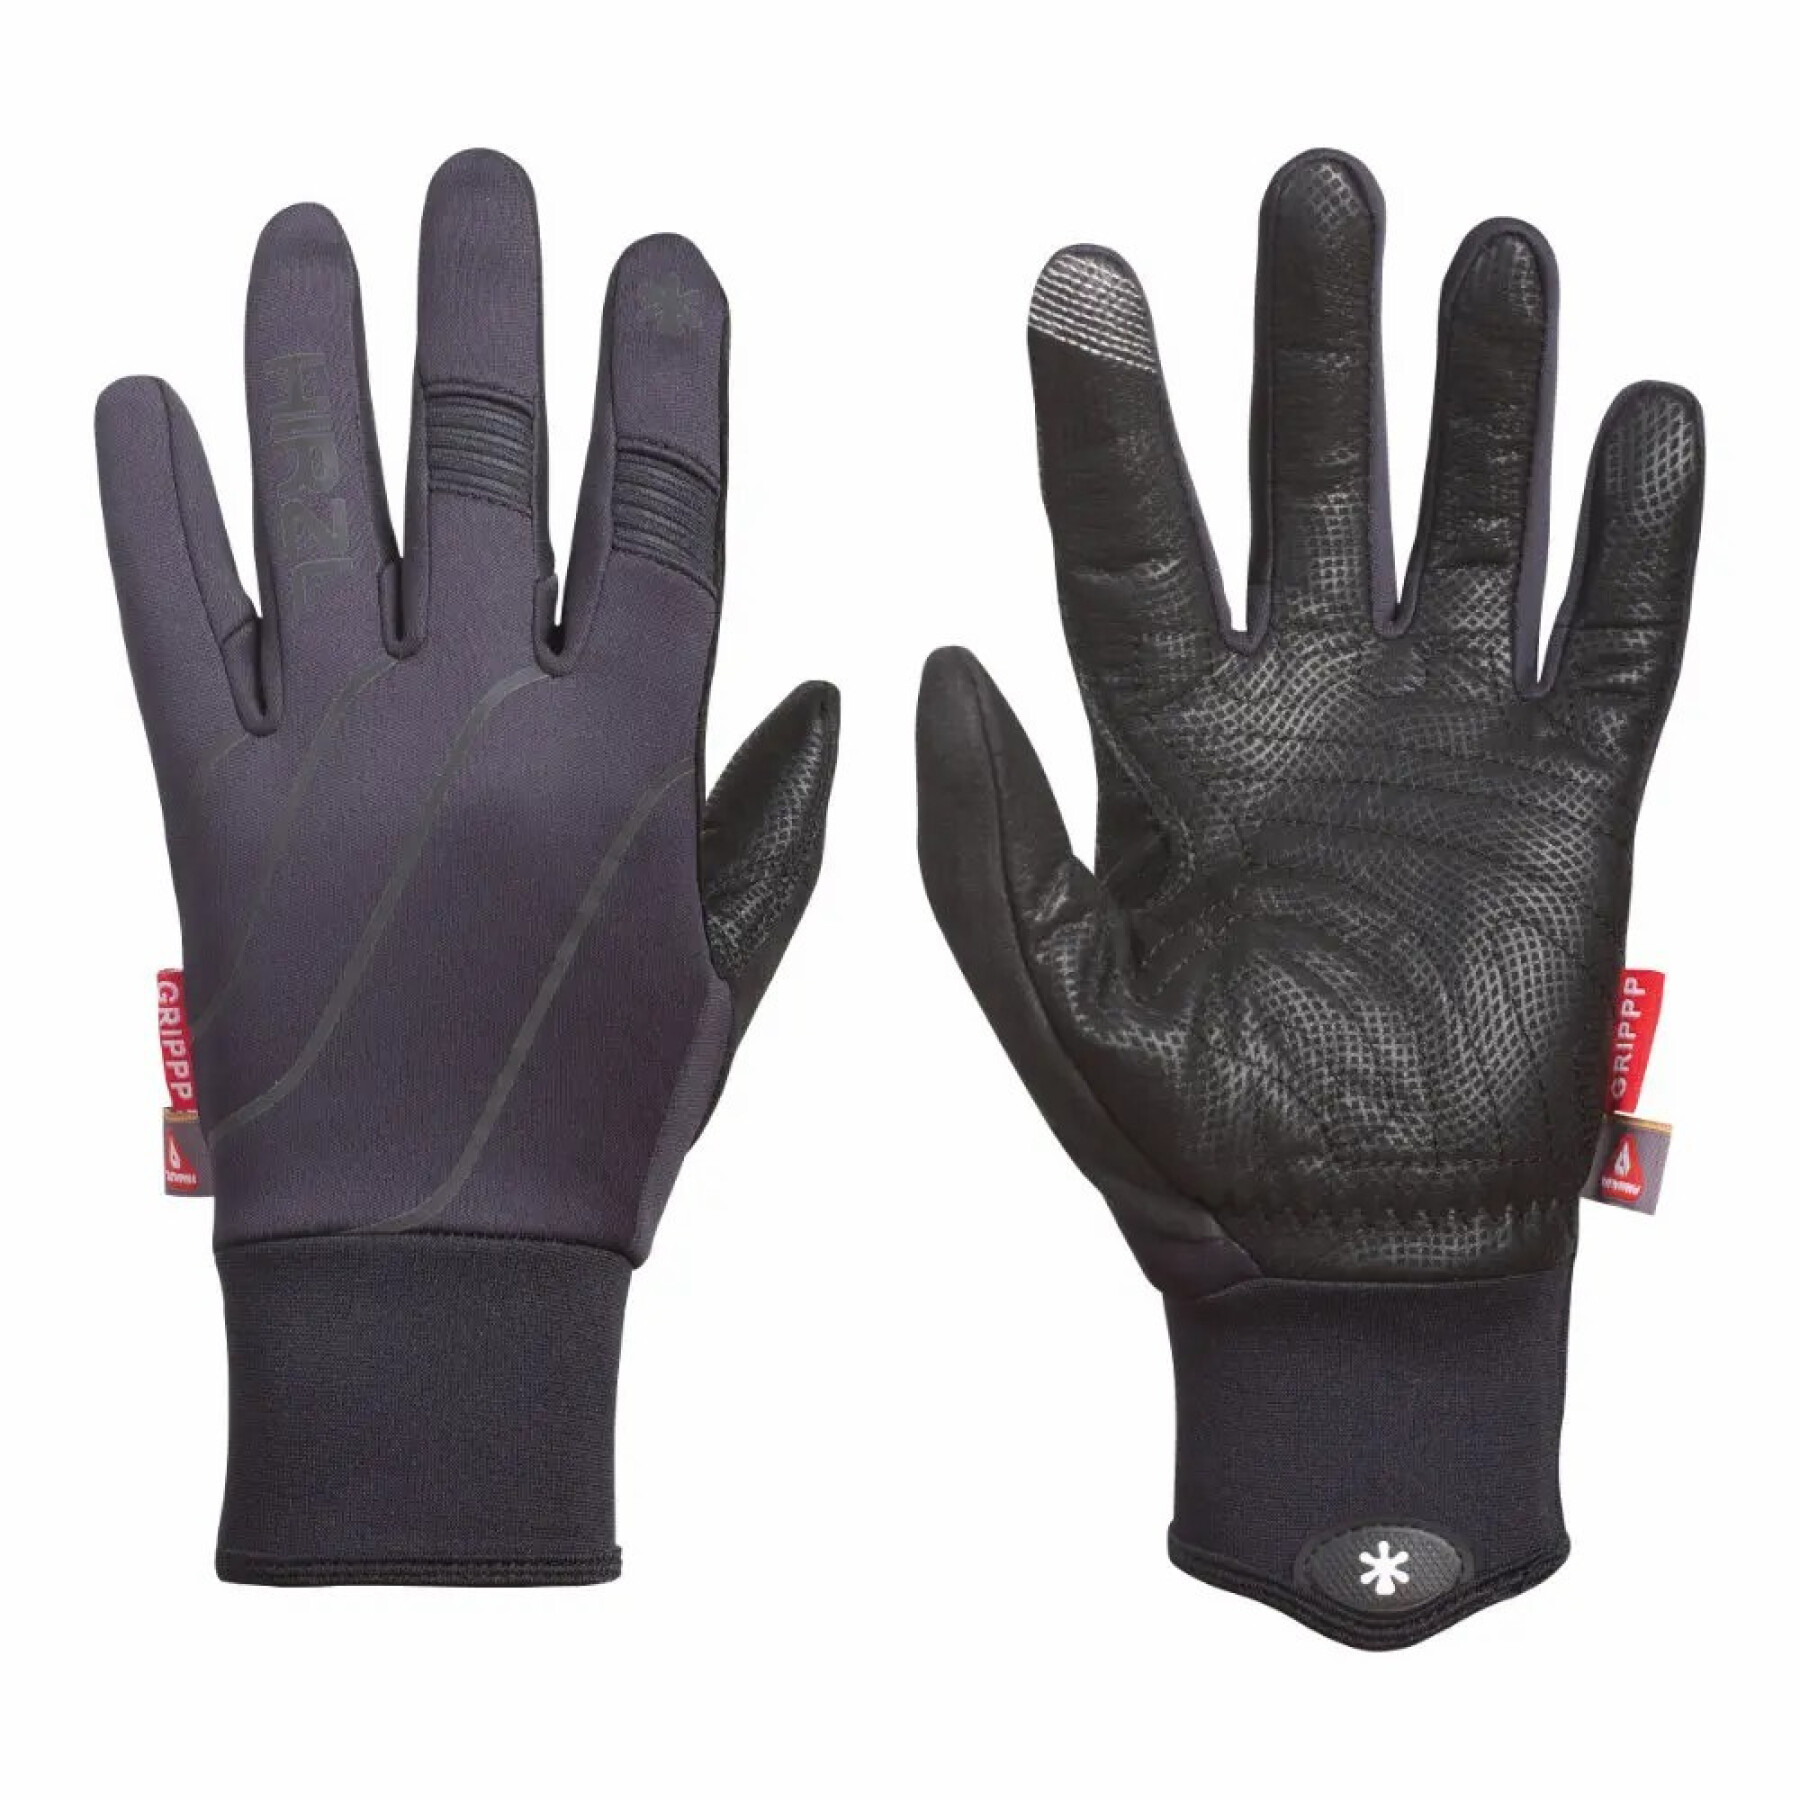 Gloves Hirzl Grippp Thermo 2.0 (x2)